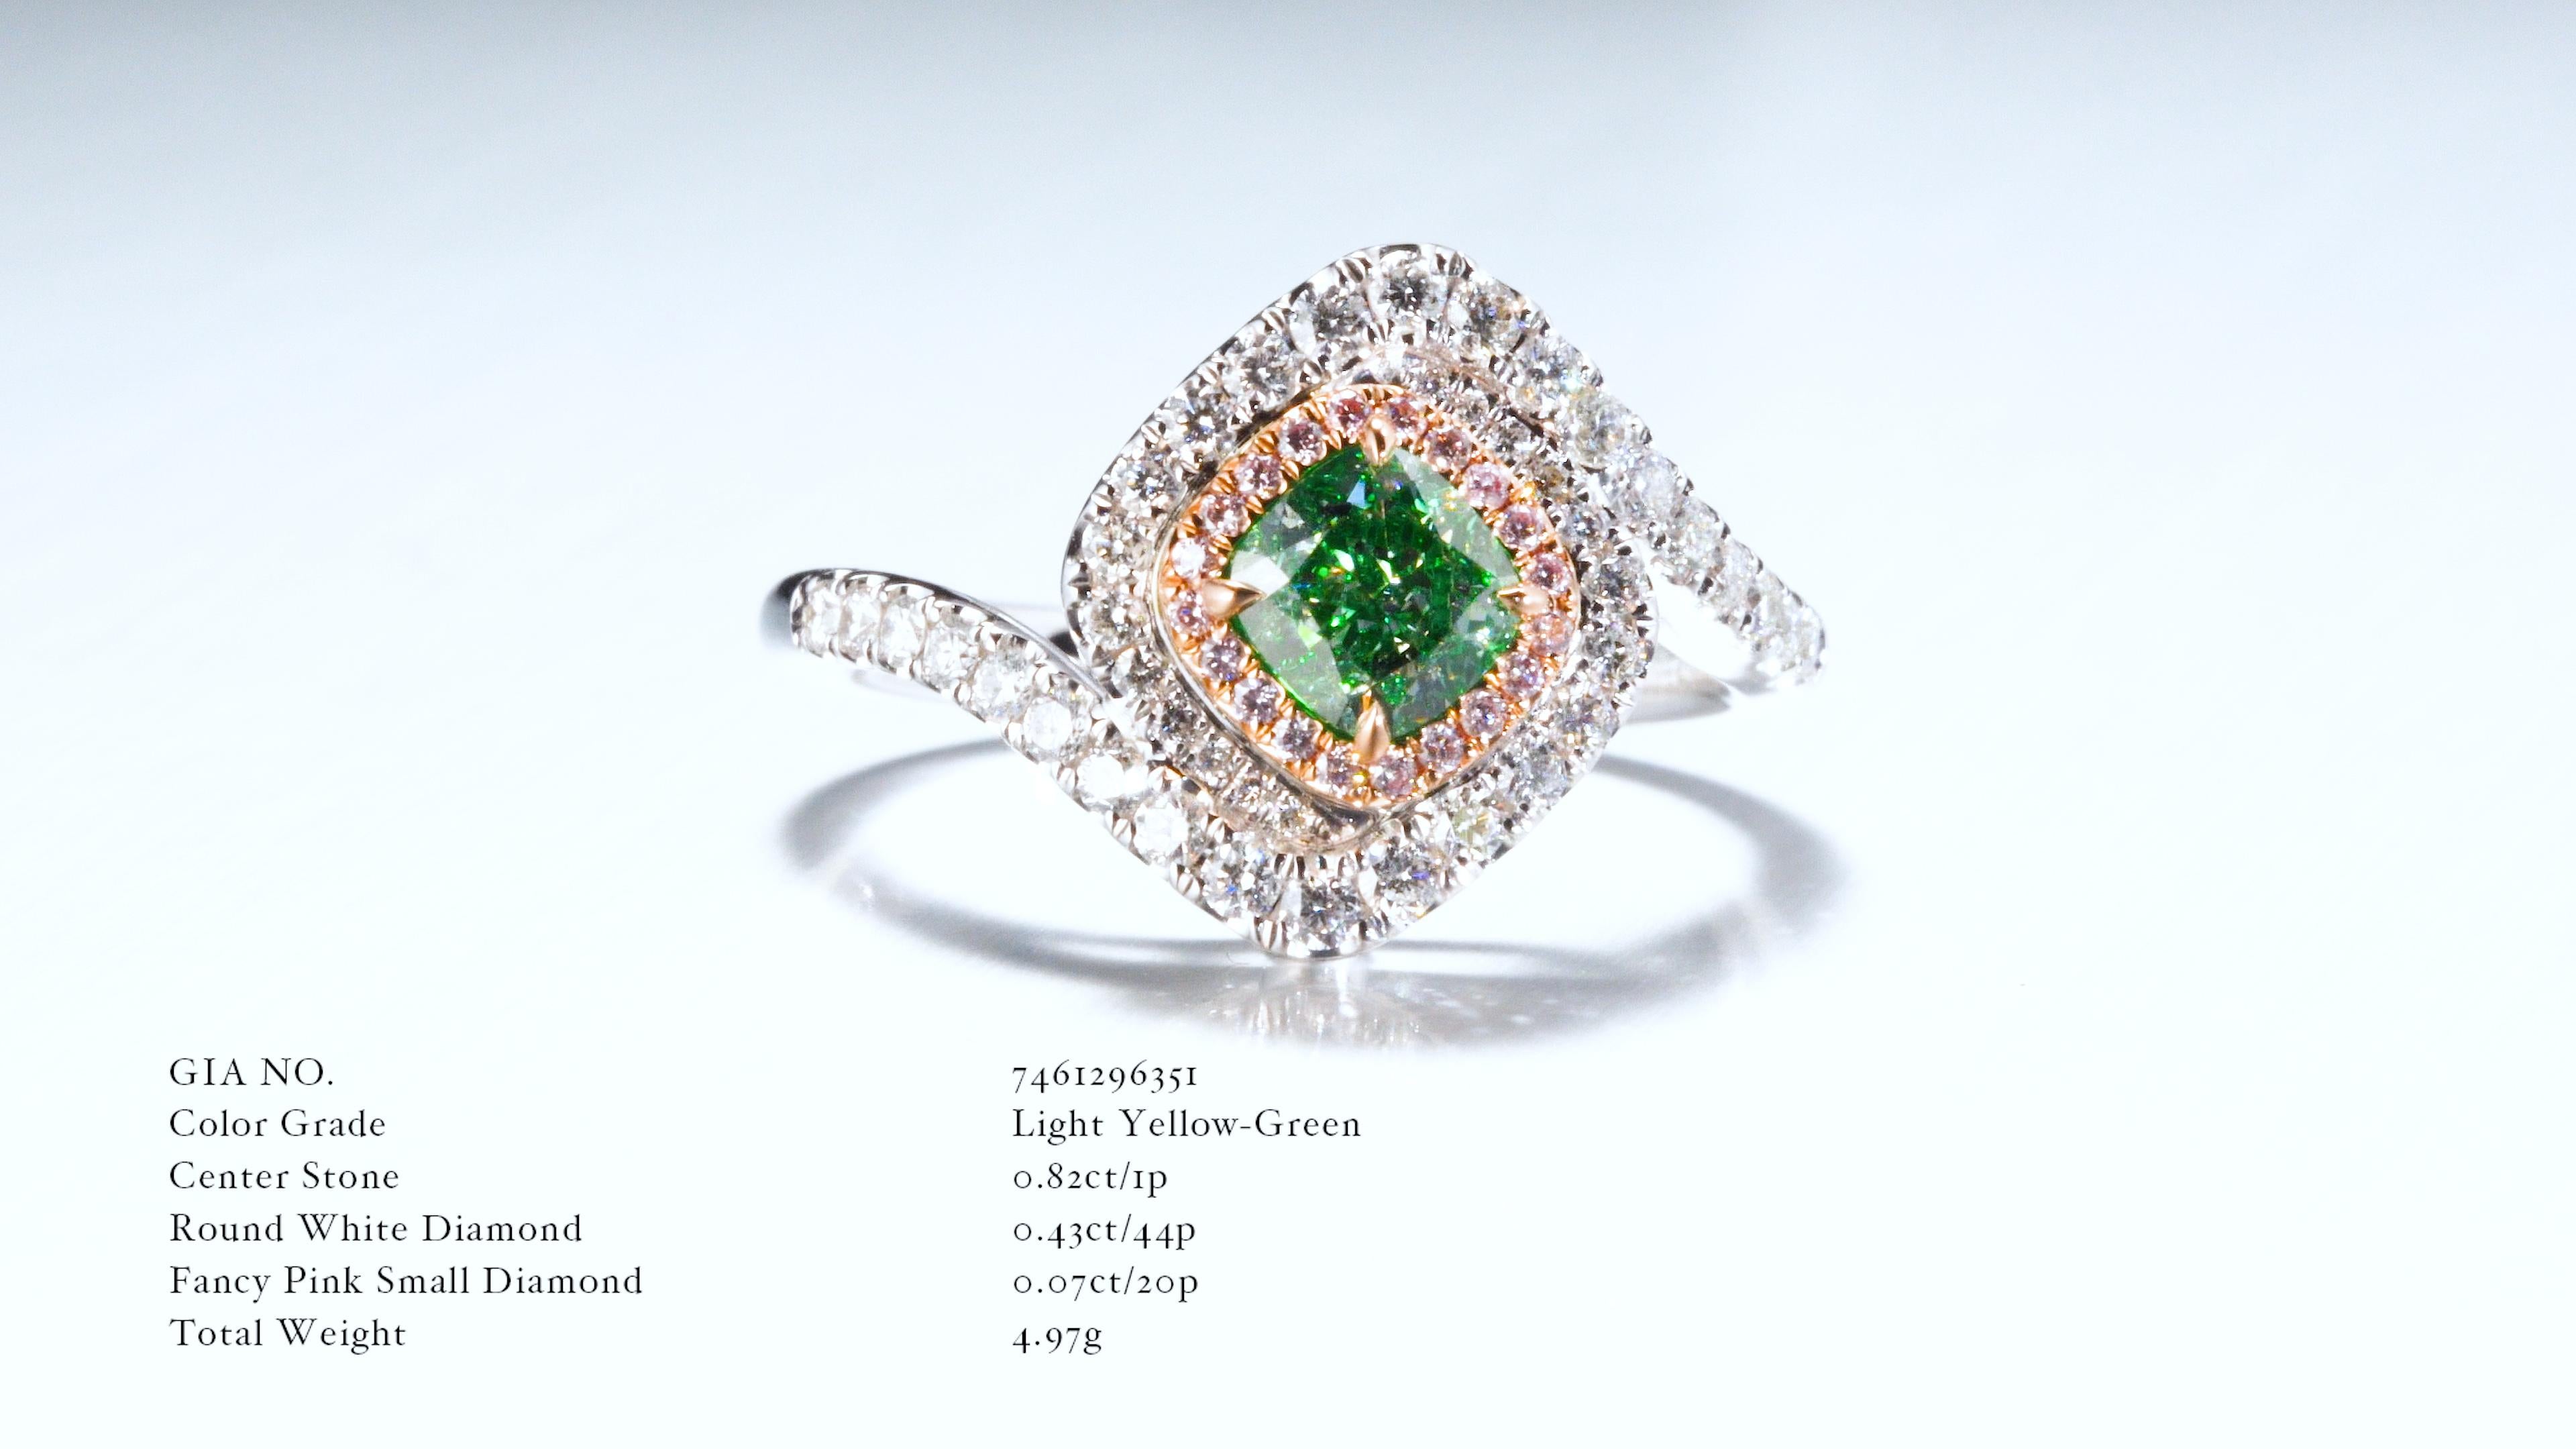 GIA Certified Natural Light Yellow-Green Diamond Ring is an extraordinary testament to the union of exceptional gemstones. At the heart of this stunning creation is a mesmerizing 0.82ct center diamond, certified by the Gemological Institute of